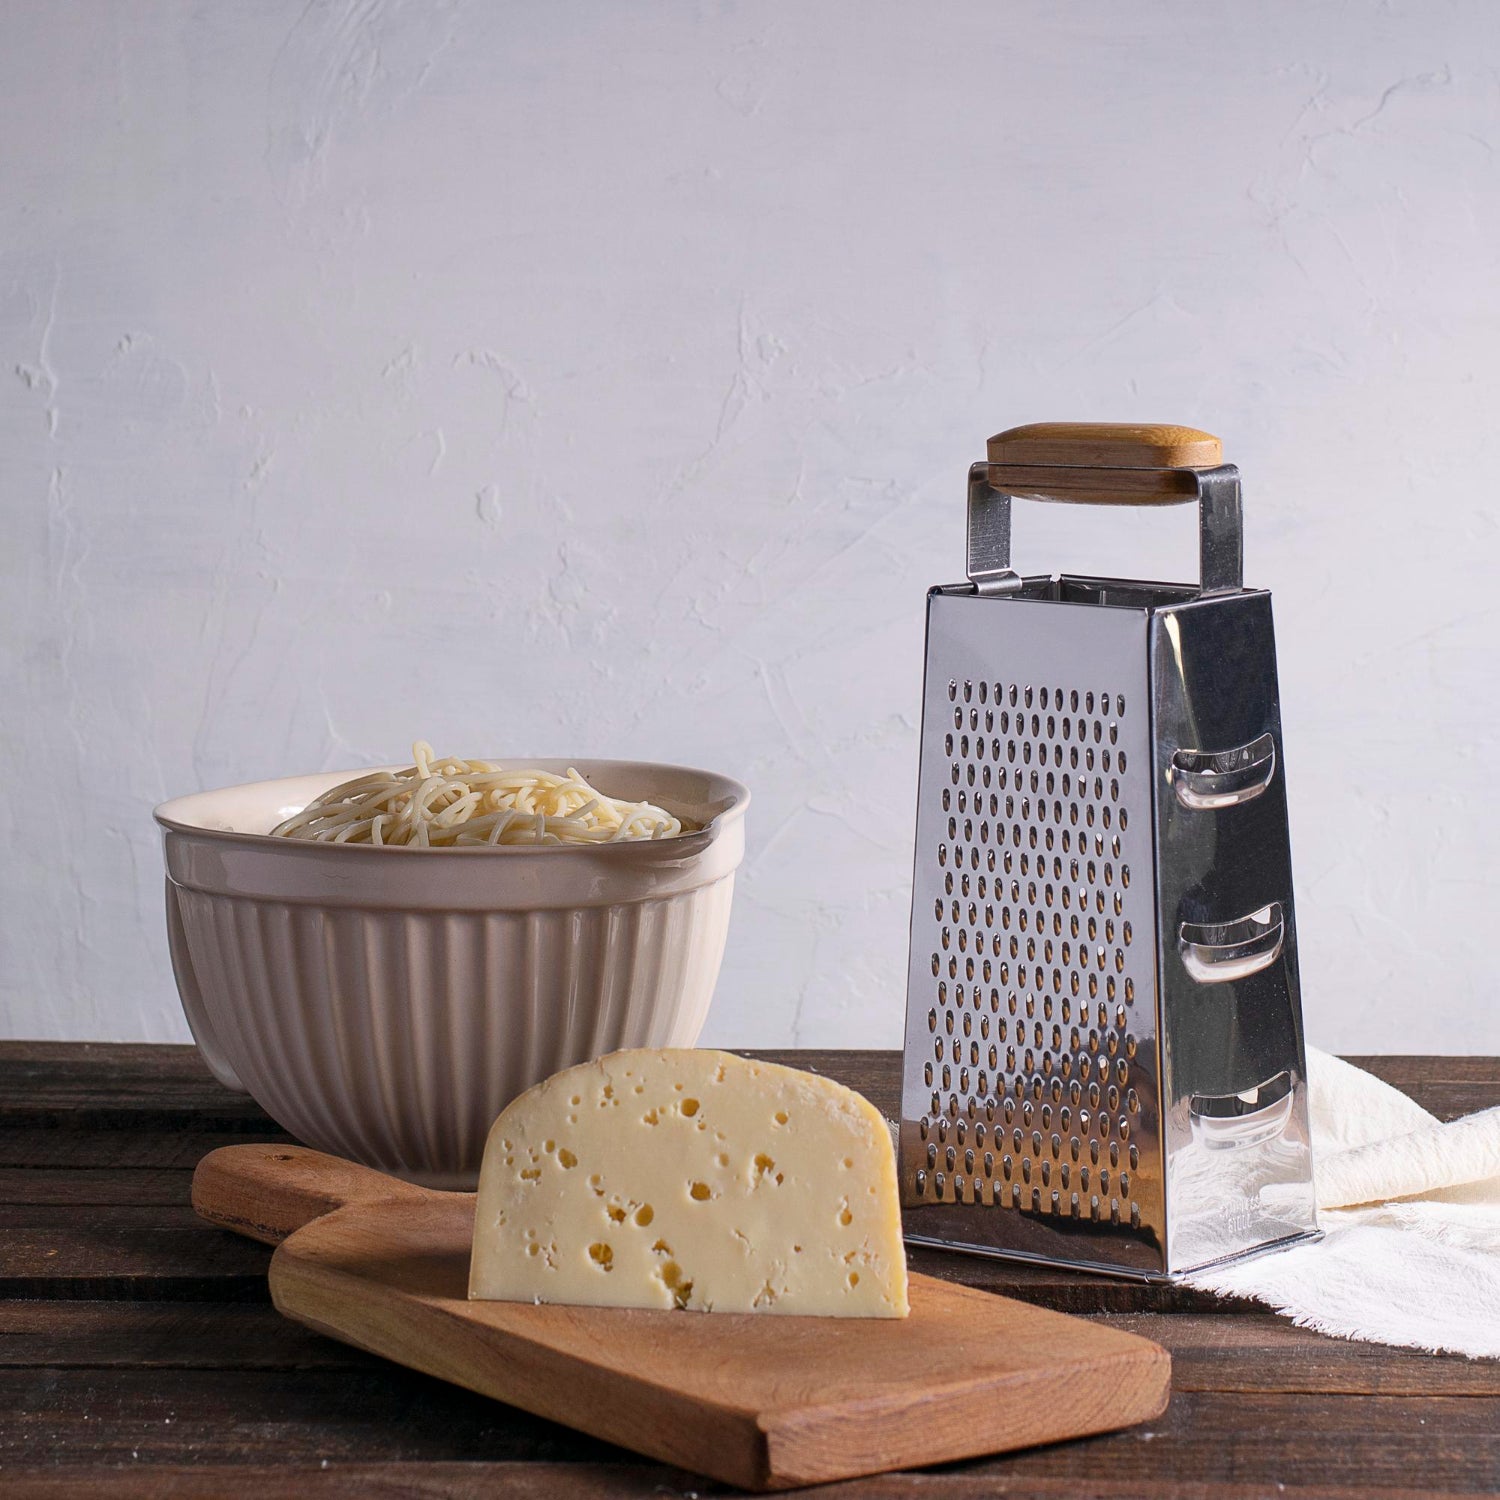 How to Clean Cheese Grater?